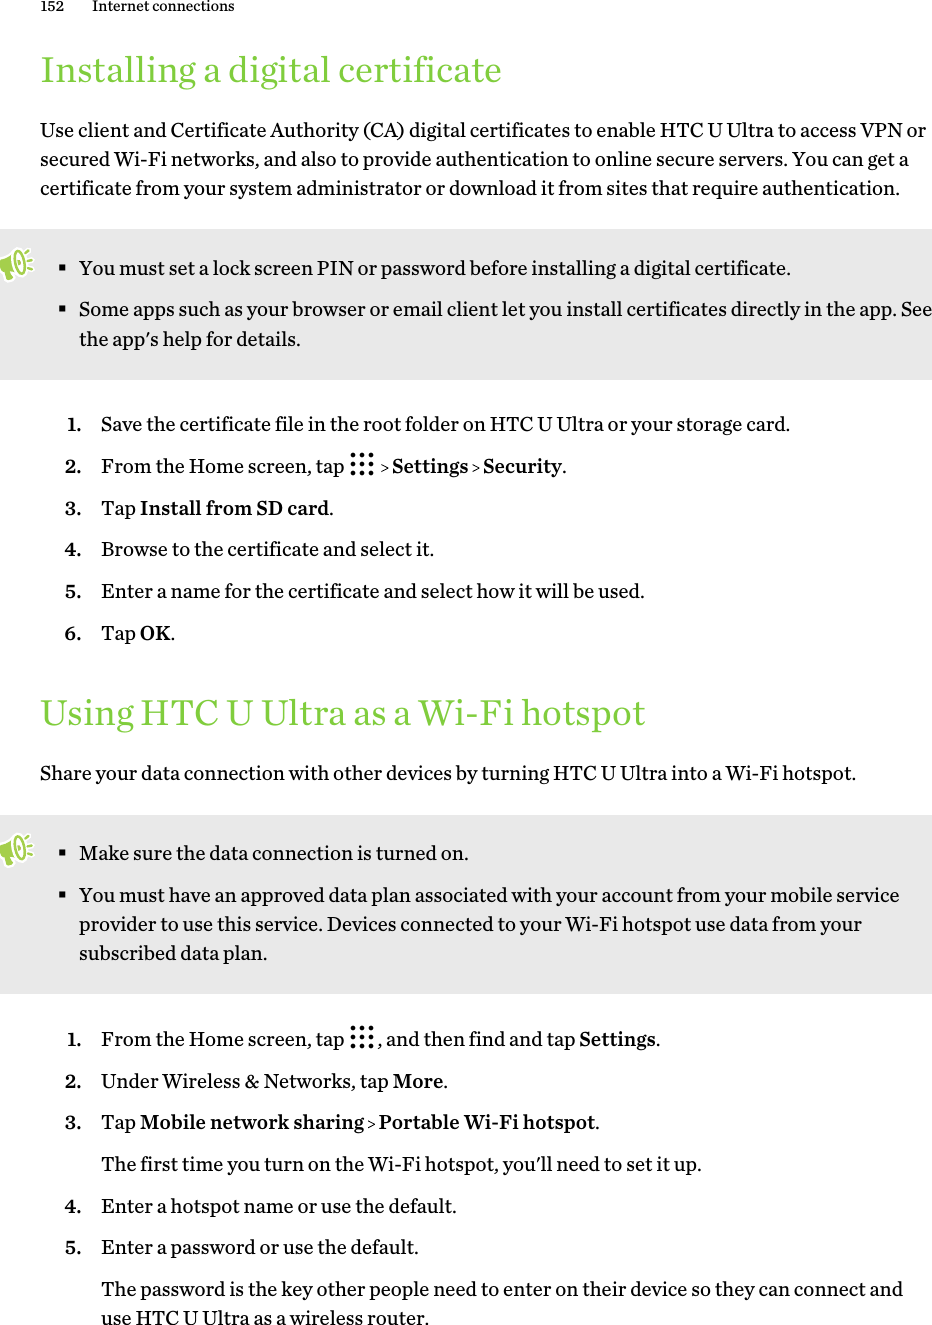 Installing a digital certificateUse client and Certificate Authority (CA) digital certificates to enable HTC U Ultra to access VPN orsecured Wi-Fi networks, and also to provide authentication to online secure servers. You can get acertificate from your system administrator or download it from sites that require authentication.§You must set a lock screen PIN or password before installing a digital certificate.§Some apps such as your browser or email client let you install certificates directly in the app. Seethe app&apos;s help for details.1. Save the certificate file in the root folder on HTC U Ultra or your storage card.2. From the Home screen, tap     Settings   Security.3. Tap Install from SD card.4. Browse to the certificate and select it.5. Enter a name for the certificate and select how it will be used.6. Tap OK.Using HTC U Ultra as a Wi-Fi hotspotShare your data connection with other devices by turning HTC U Ultra into a Wi-Fi hotspot.§Make sure the data connection is turned on.§You must have an approved data plan associated with your account from your mobile serviceprovider to use this service. Devices connected to your Wi-Fi hotspot use data from yoursubscribed data plan.1. From the Home screen, tap  , and then find and tap Settings.2. Under Wireless &amp; Networks, tap More.3. Tap Mobile network sharing   Portable Wi-Fi hotspot. The first time you turn on the Wi-Fi hotspot, you&apos;ll need to set it up.4. Enter a hotspot name or use the default.5. Enter a password or use the default. The password is the key other people need to enter on their device so they can connect anduse HTC U Ultra as a wireless router.152 Internet connections